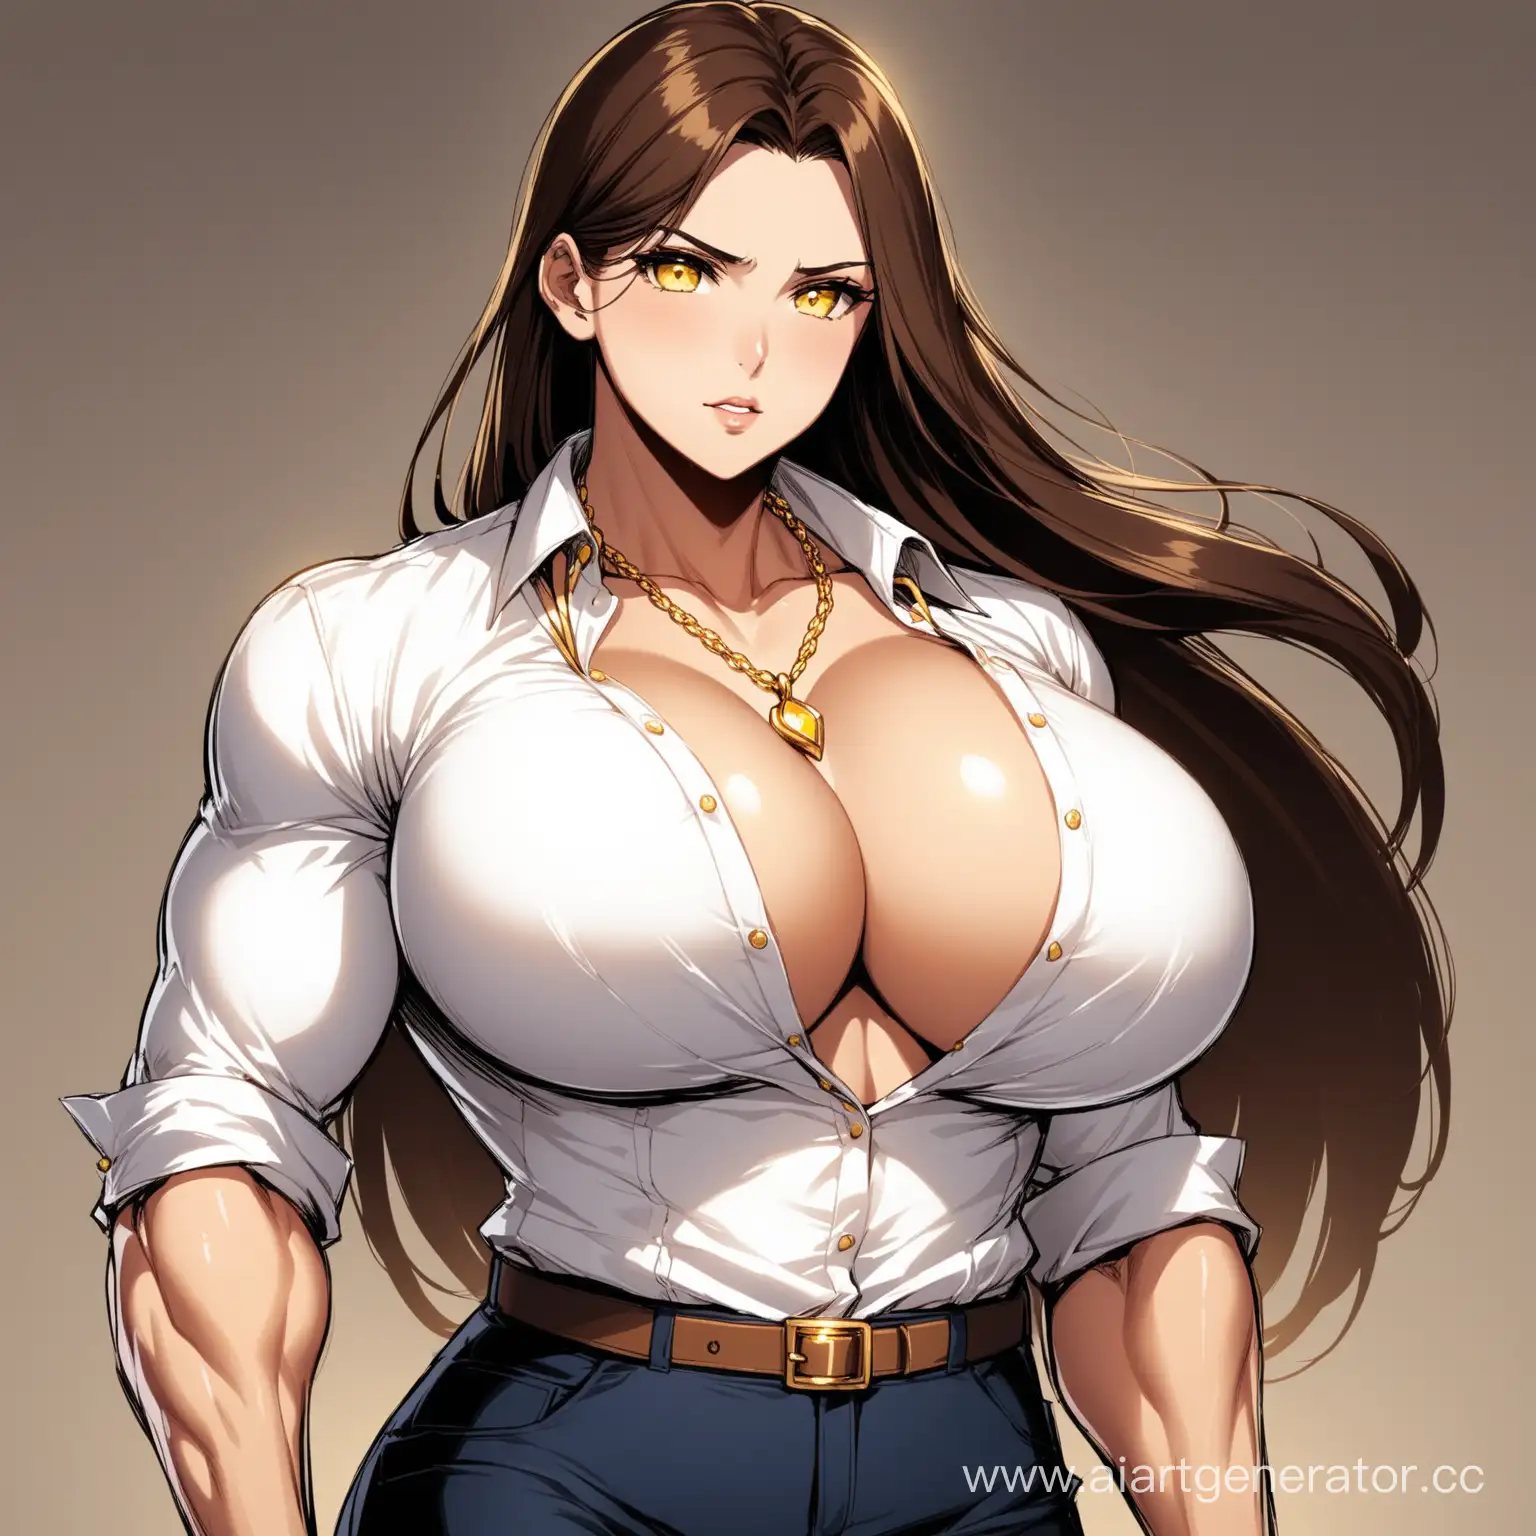 Confident-Woman-with-Unbuttoned-Shirt-and-Gold-Necklace